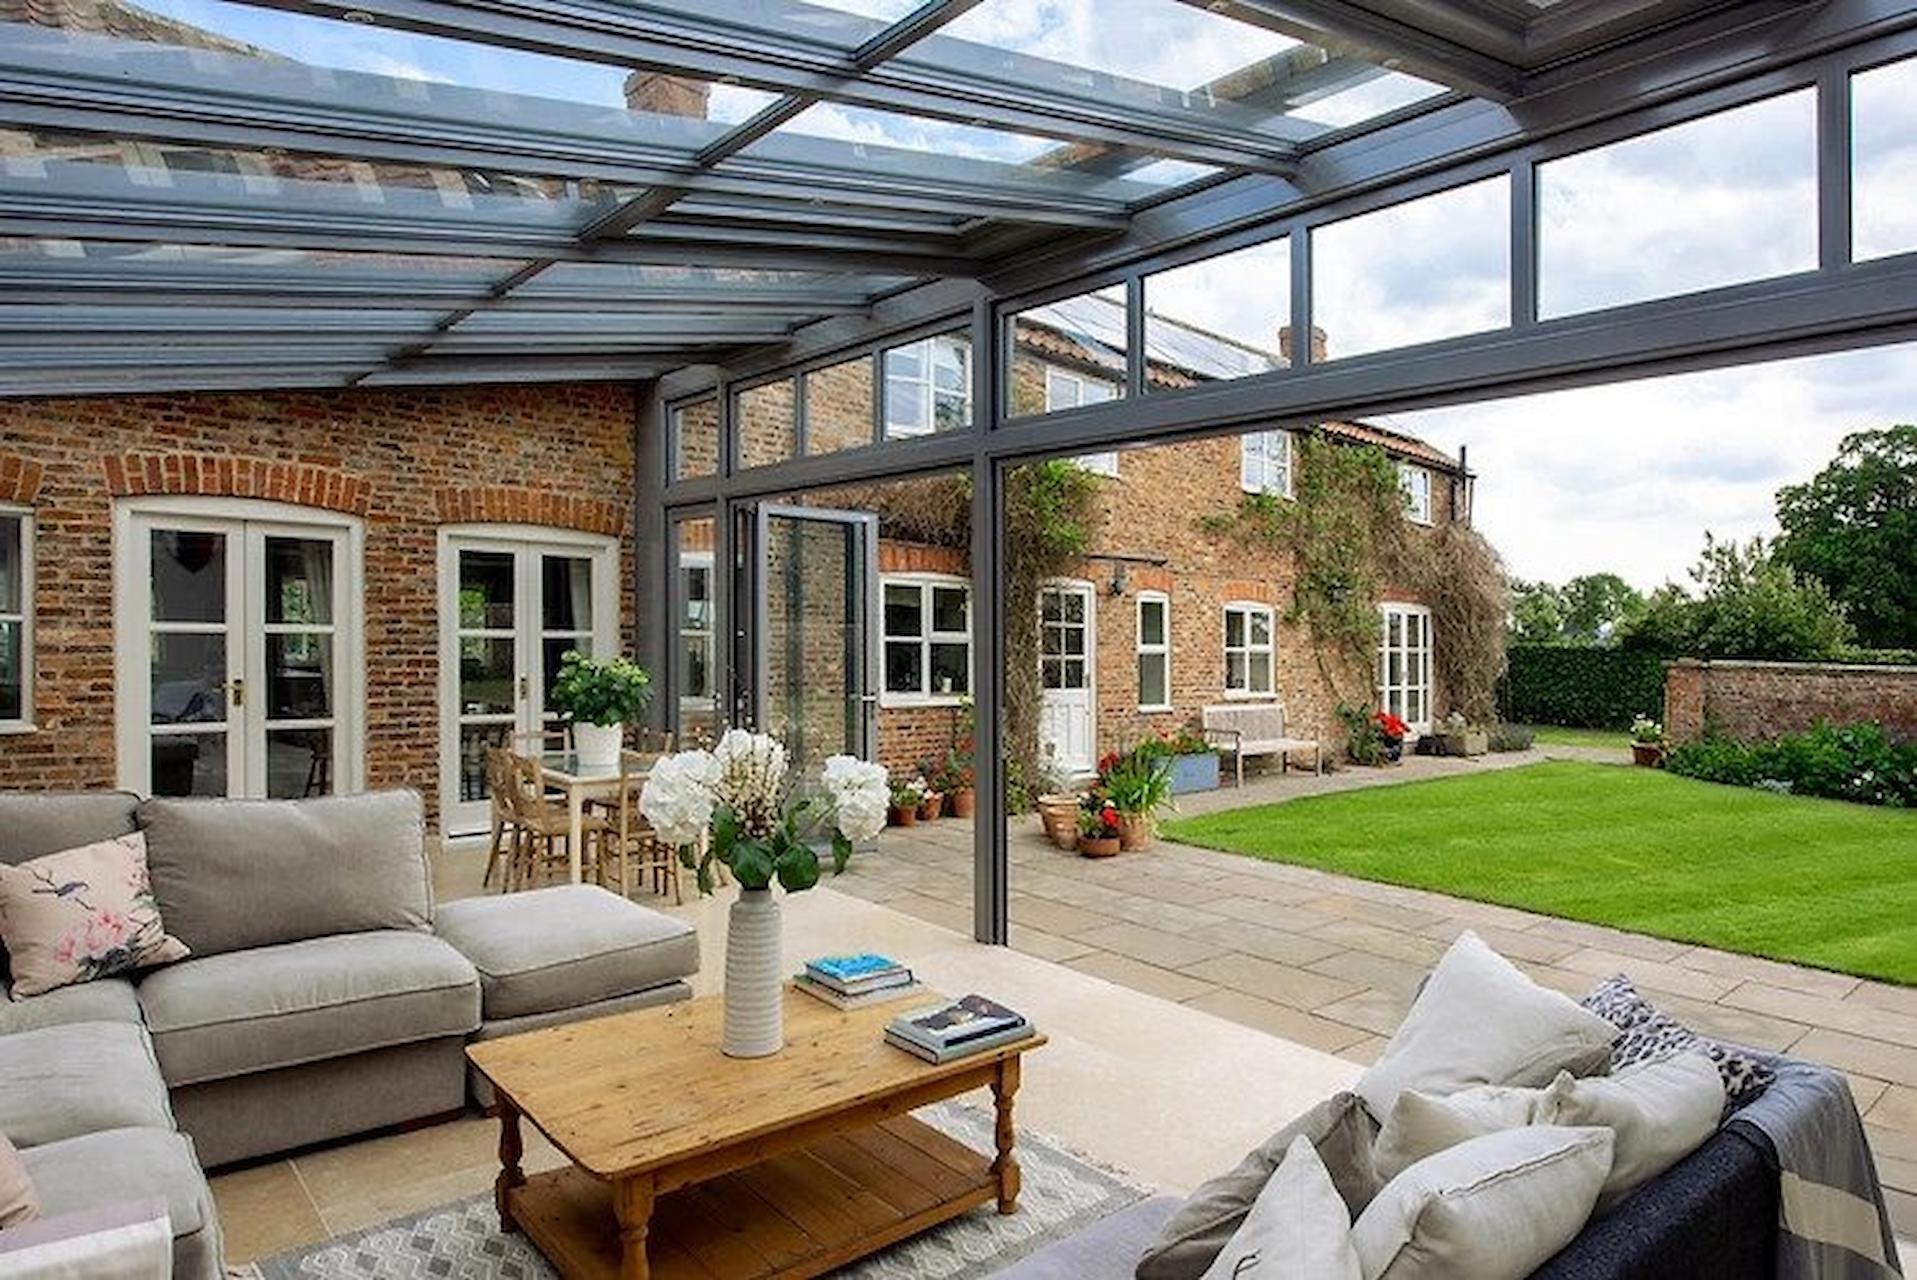 Why Luxury Conservatory Is A Fruitful Addition To Your Home?